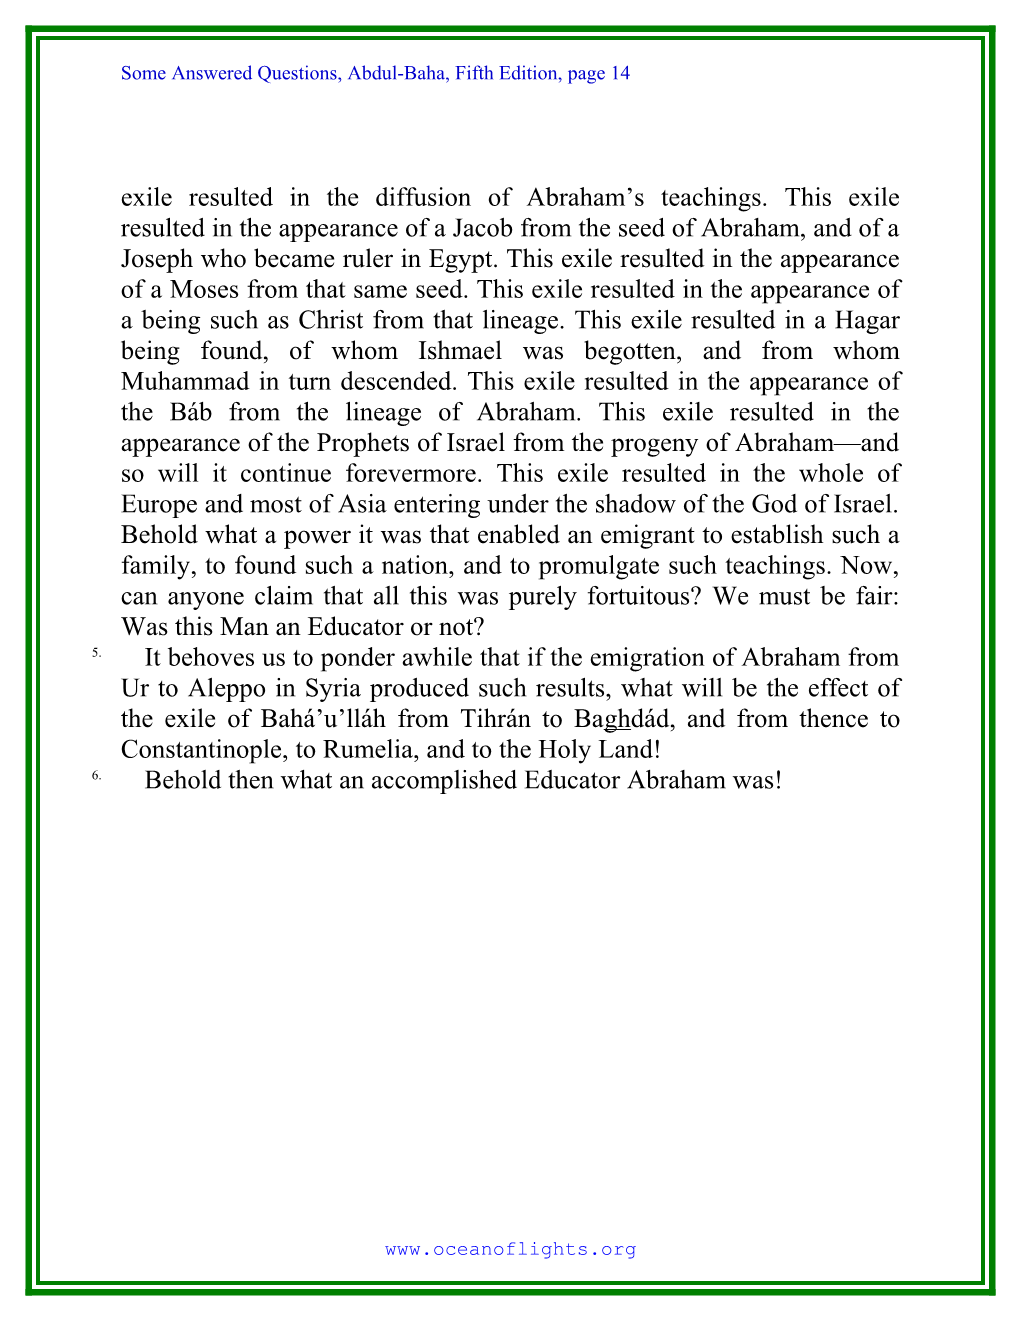 Some Answered Questions, Abdul-Baha, Fifth Edition, Page 14